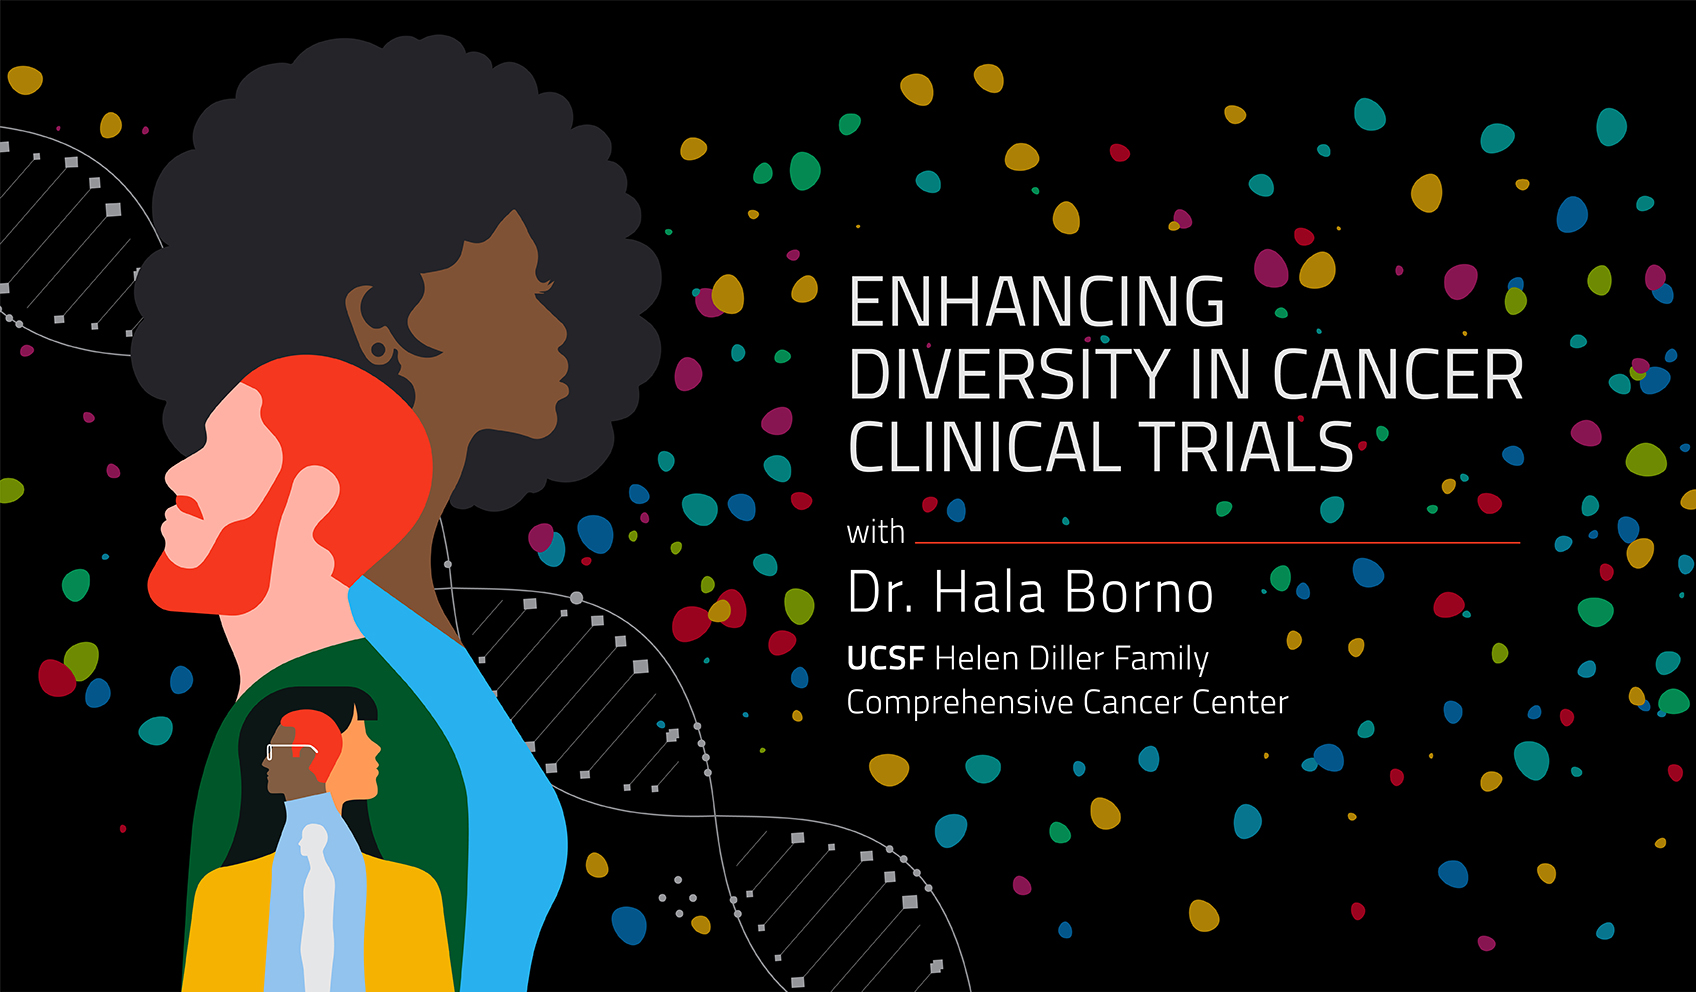 Enhancing Diversity in Cancer Clinical Trials